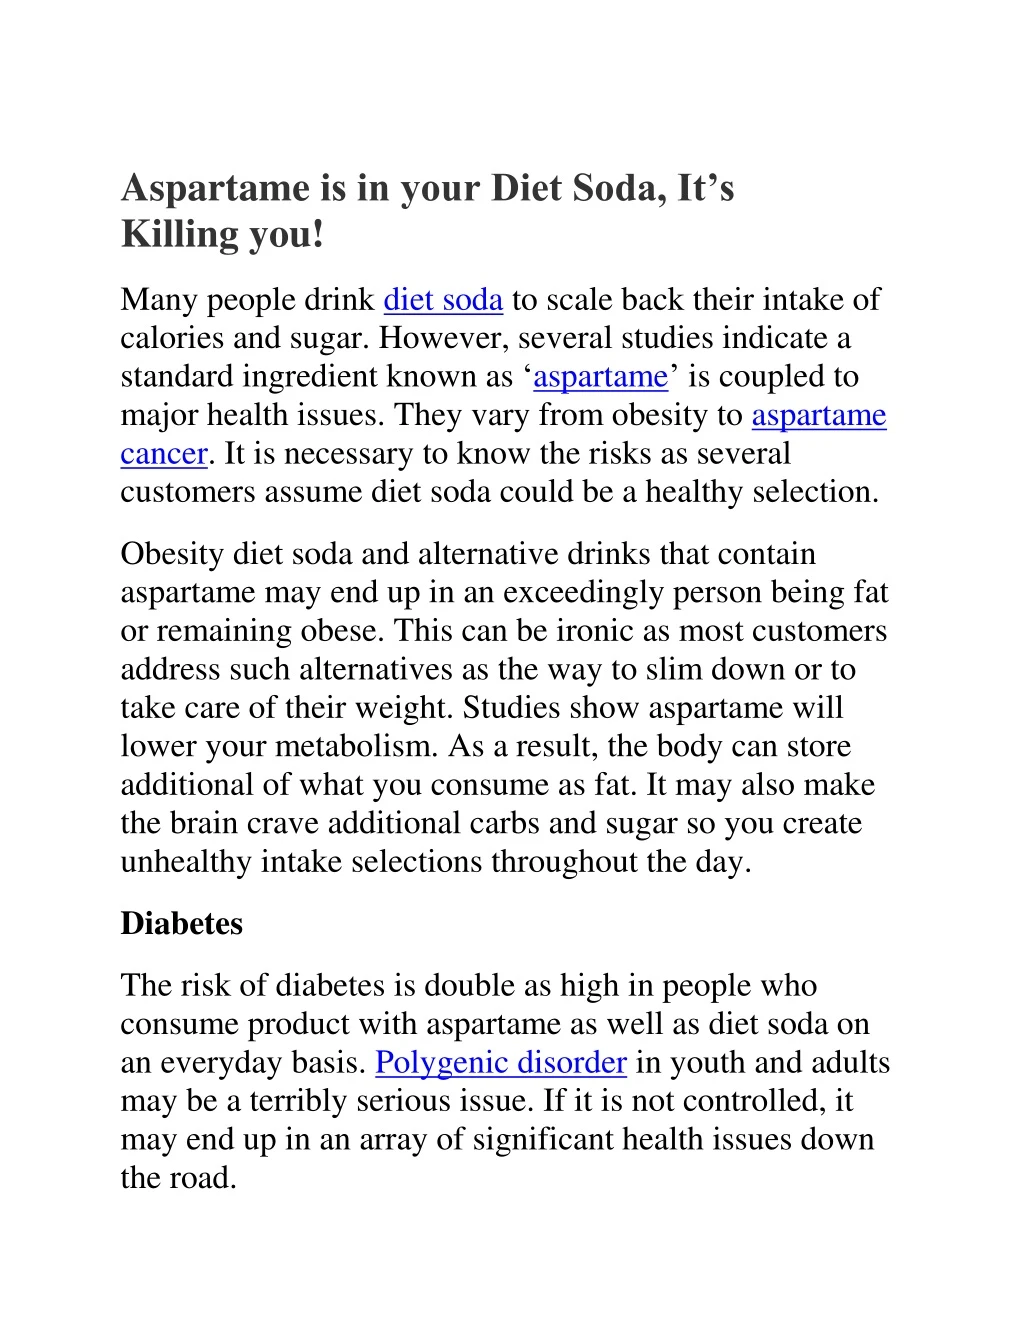 aspartame is in your diet soda it s killing you